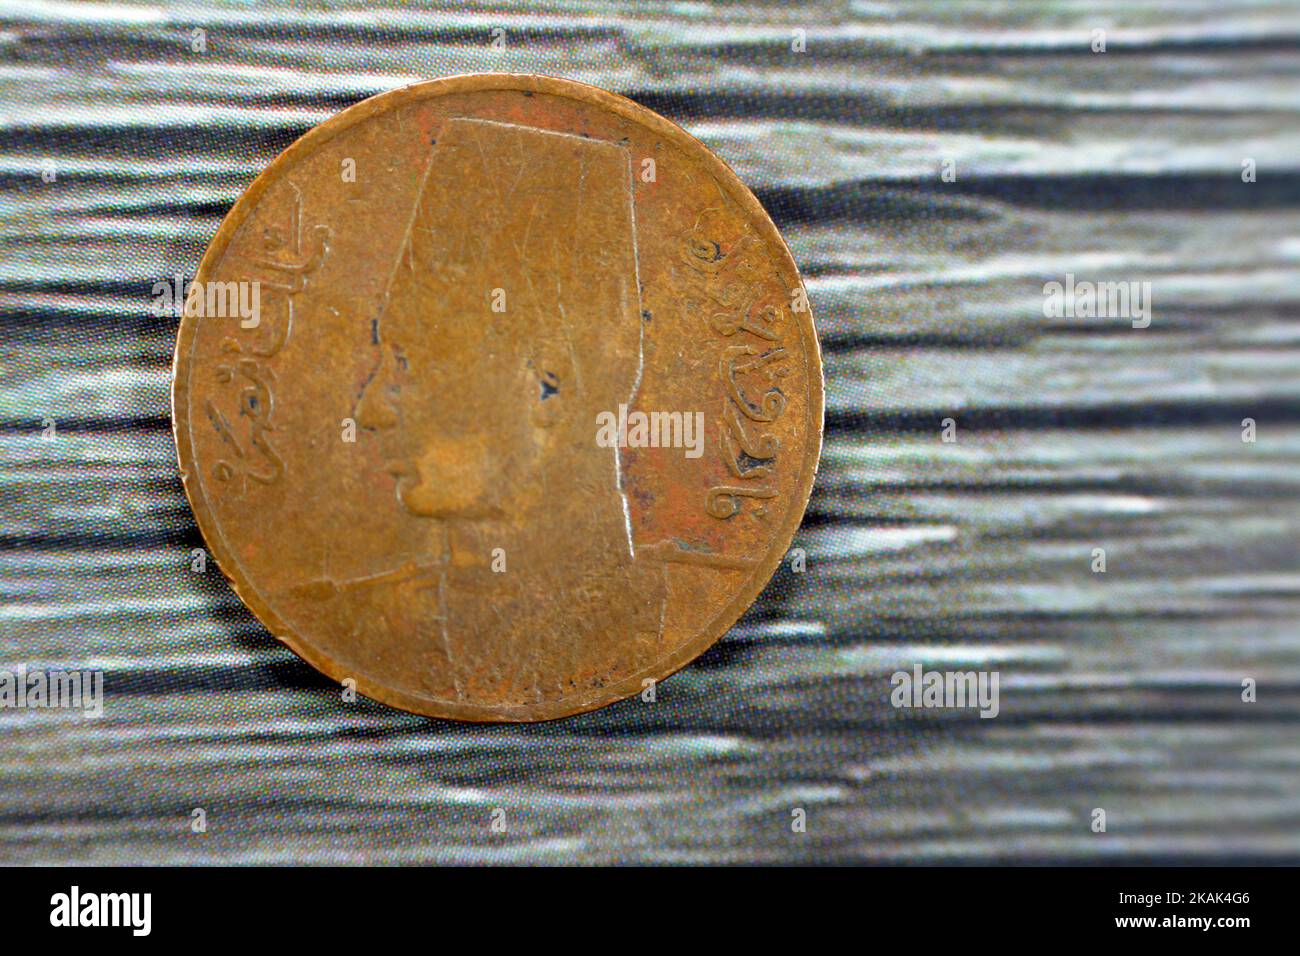 Obverse side of an old 1 One Egyptian red millieme year 1950 features Portrait of King Farouk the 1st facing left, wearing fez, the currency of kingdo Stock Photo